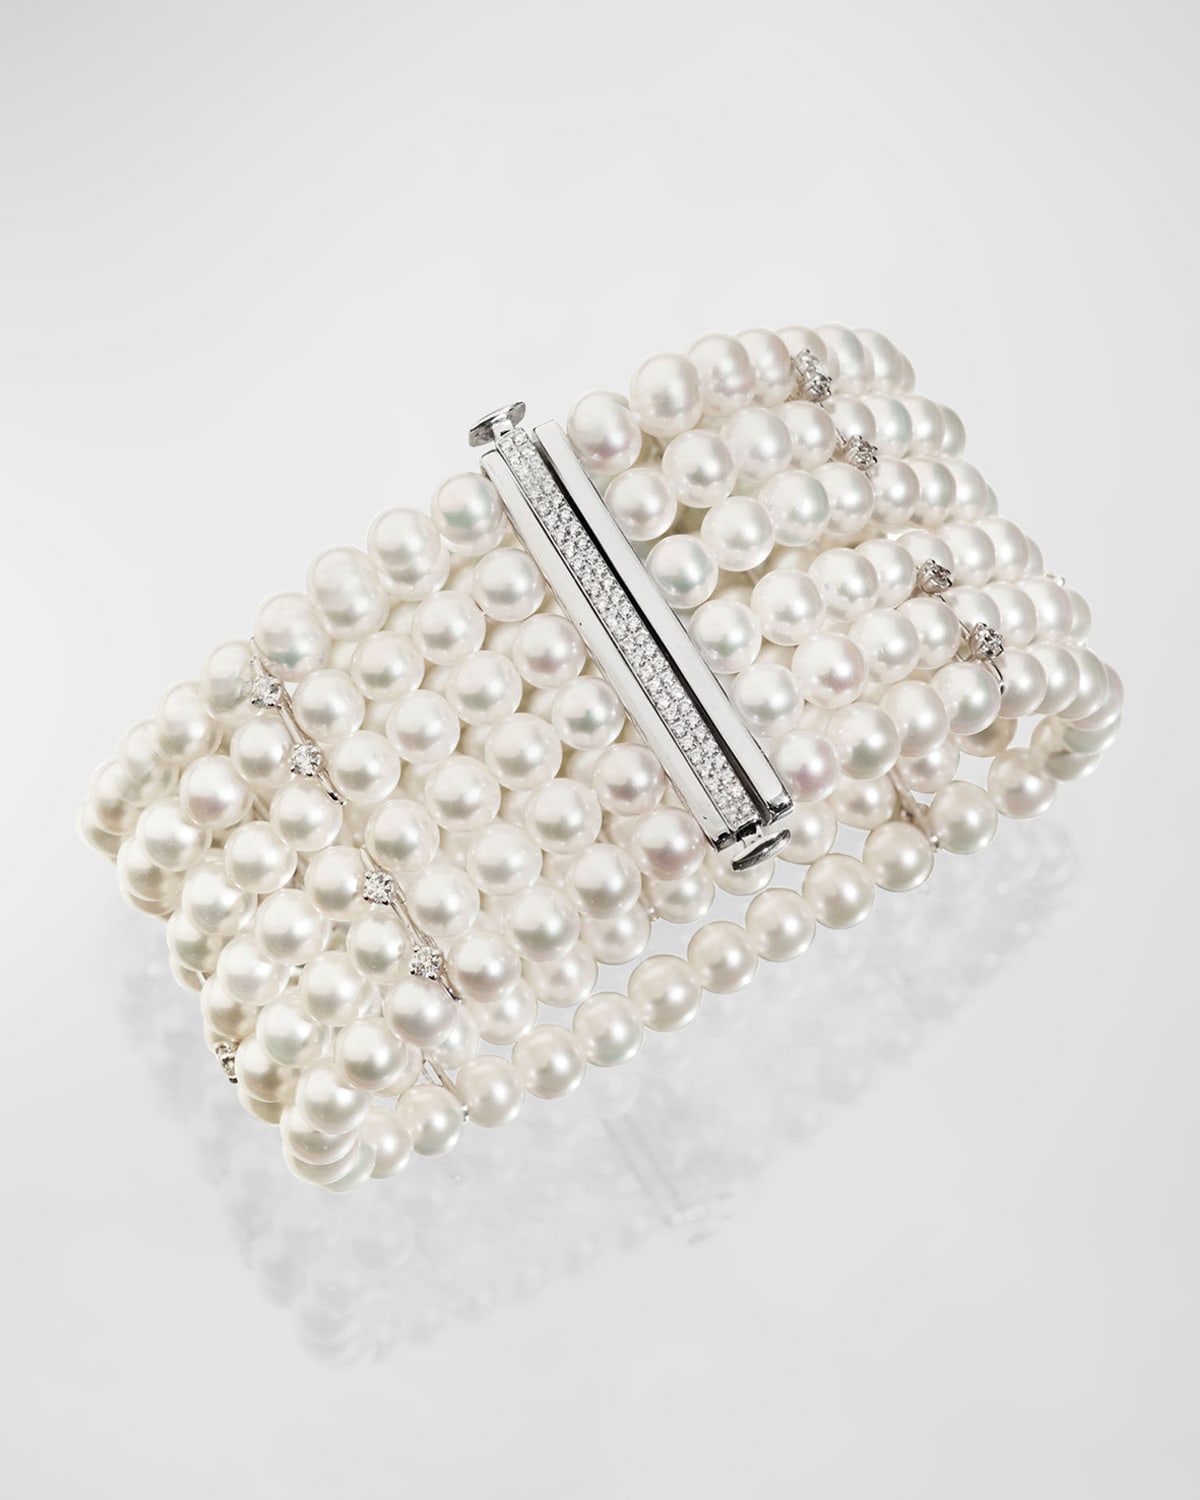 18K White Gold Bracelet with Diamonds and Freshwater Pearls